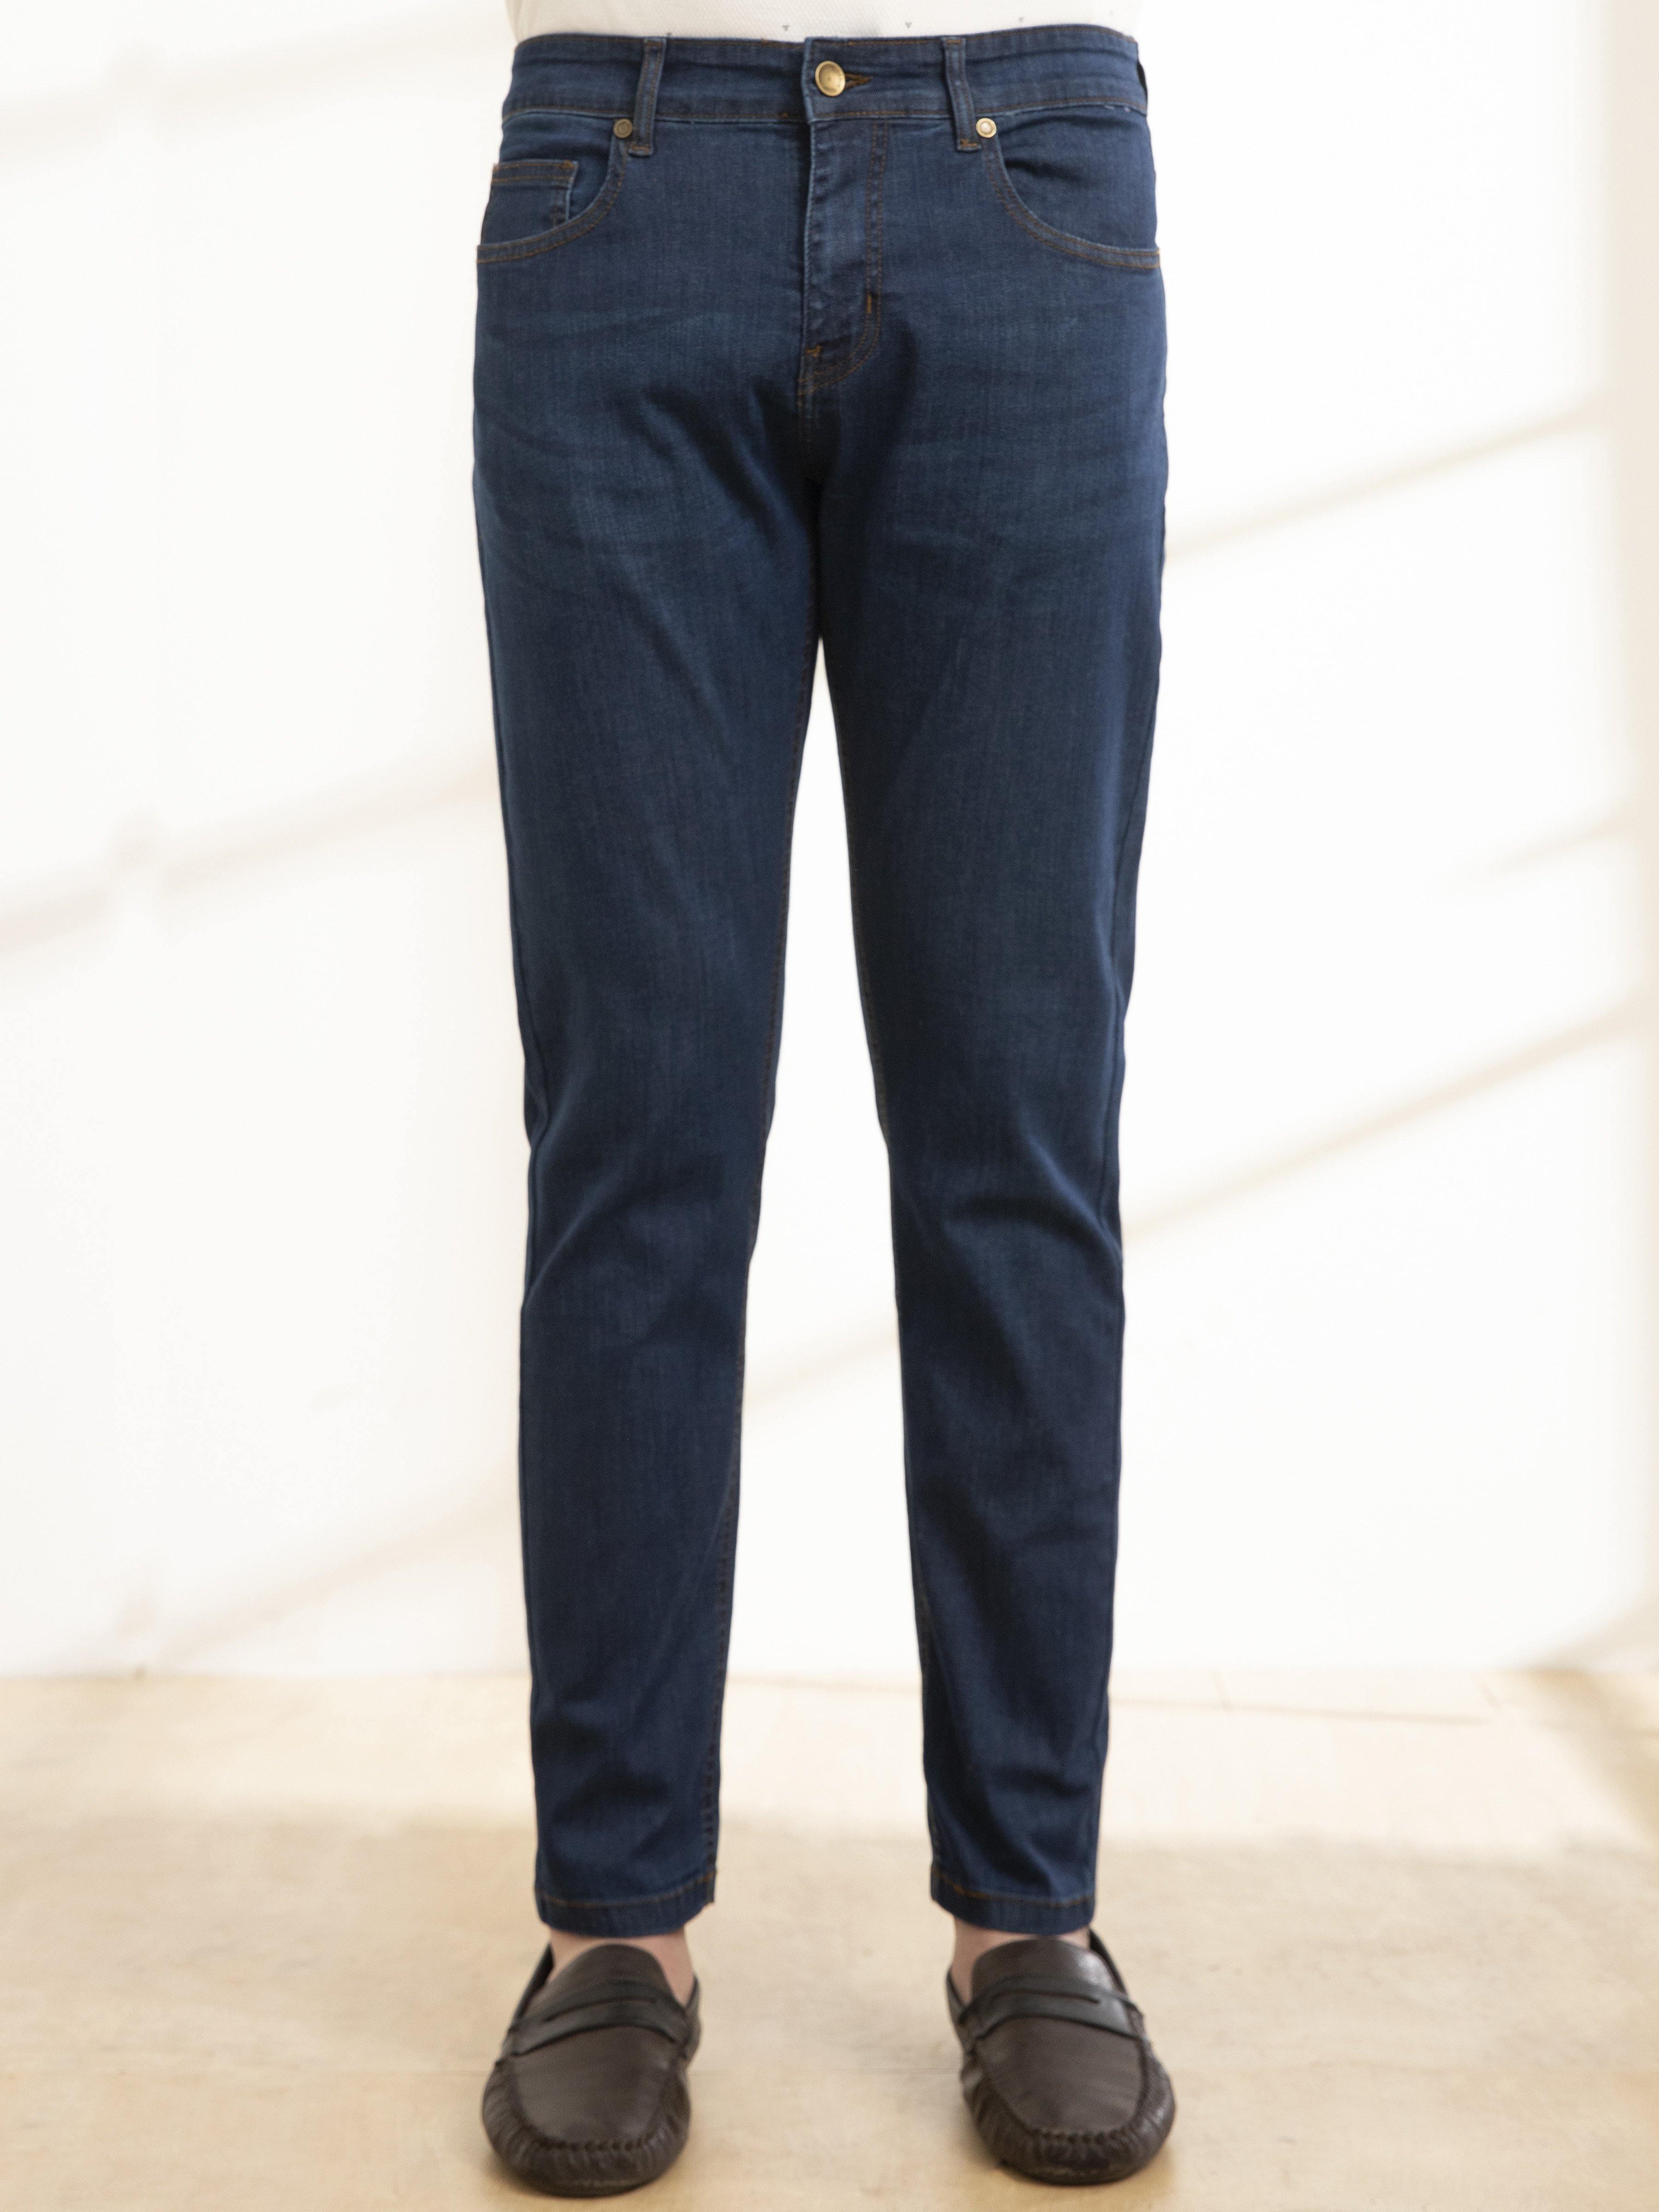 SLIM FIT JEANS DARK NAVY at Charcoal Clothing